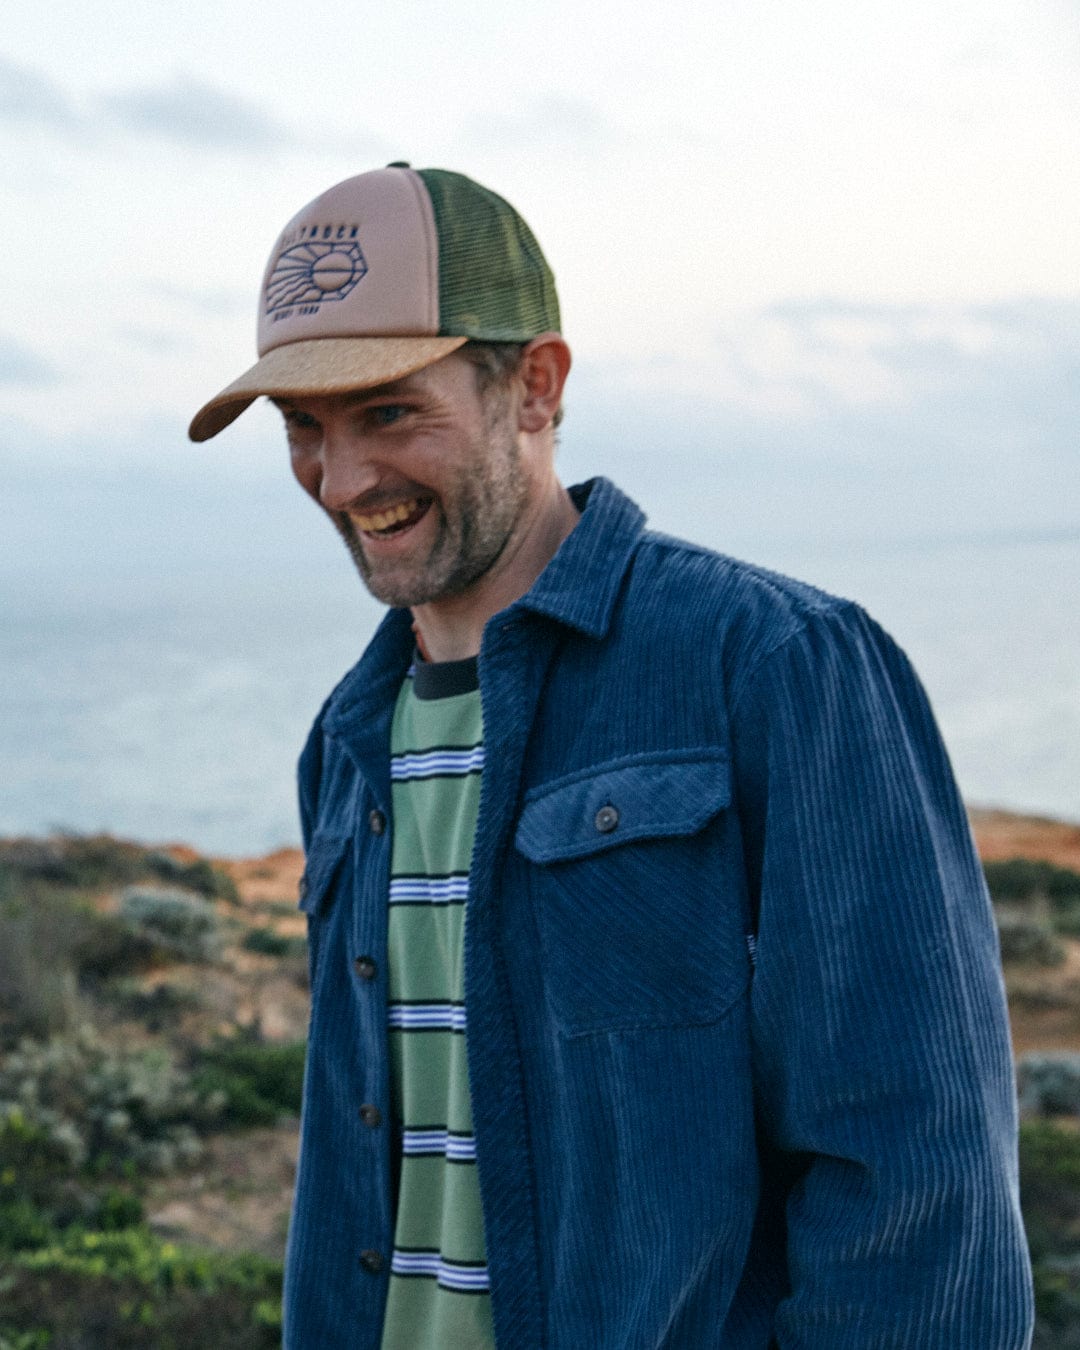 A man in a Lineal Trucker Cap in Cream with Saltrock branding and denim jacket smiling outdoors with a natural landscape in the background.